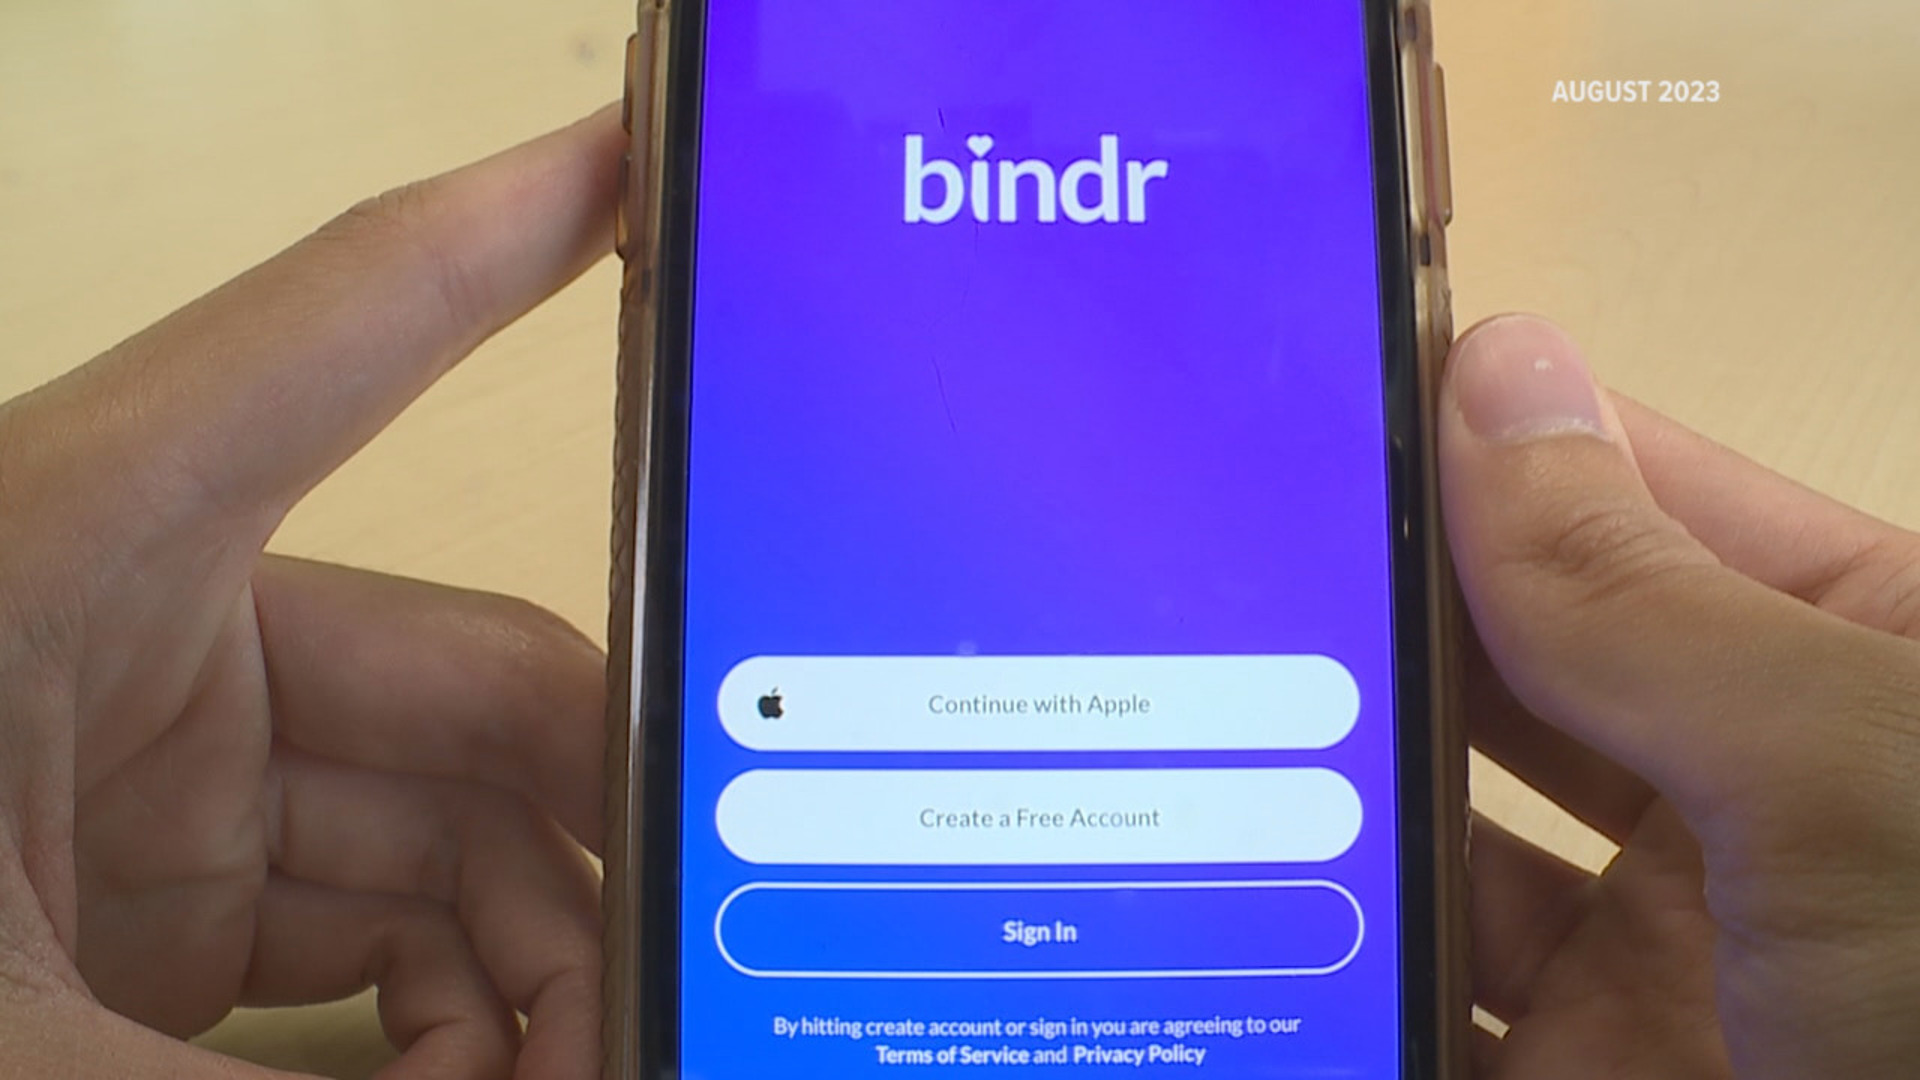 The dating app Bindr is celebrating more than 100,000 registered users from around the world after hitting the market more than a year ago.